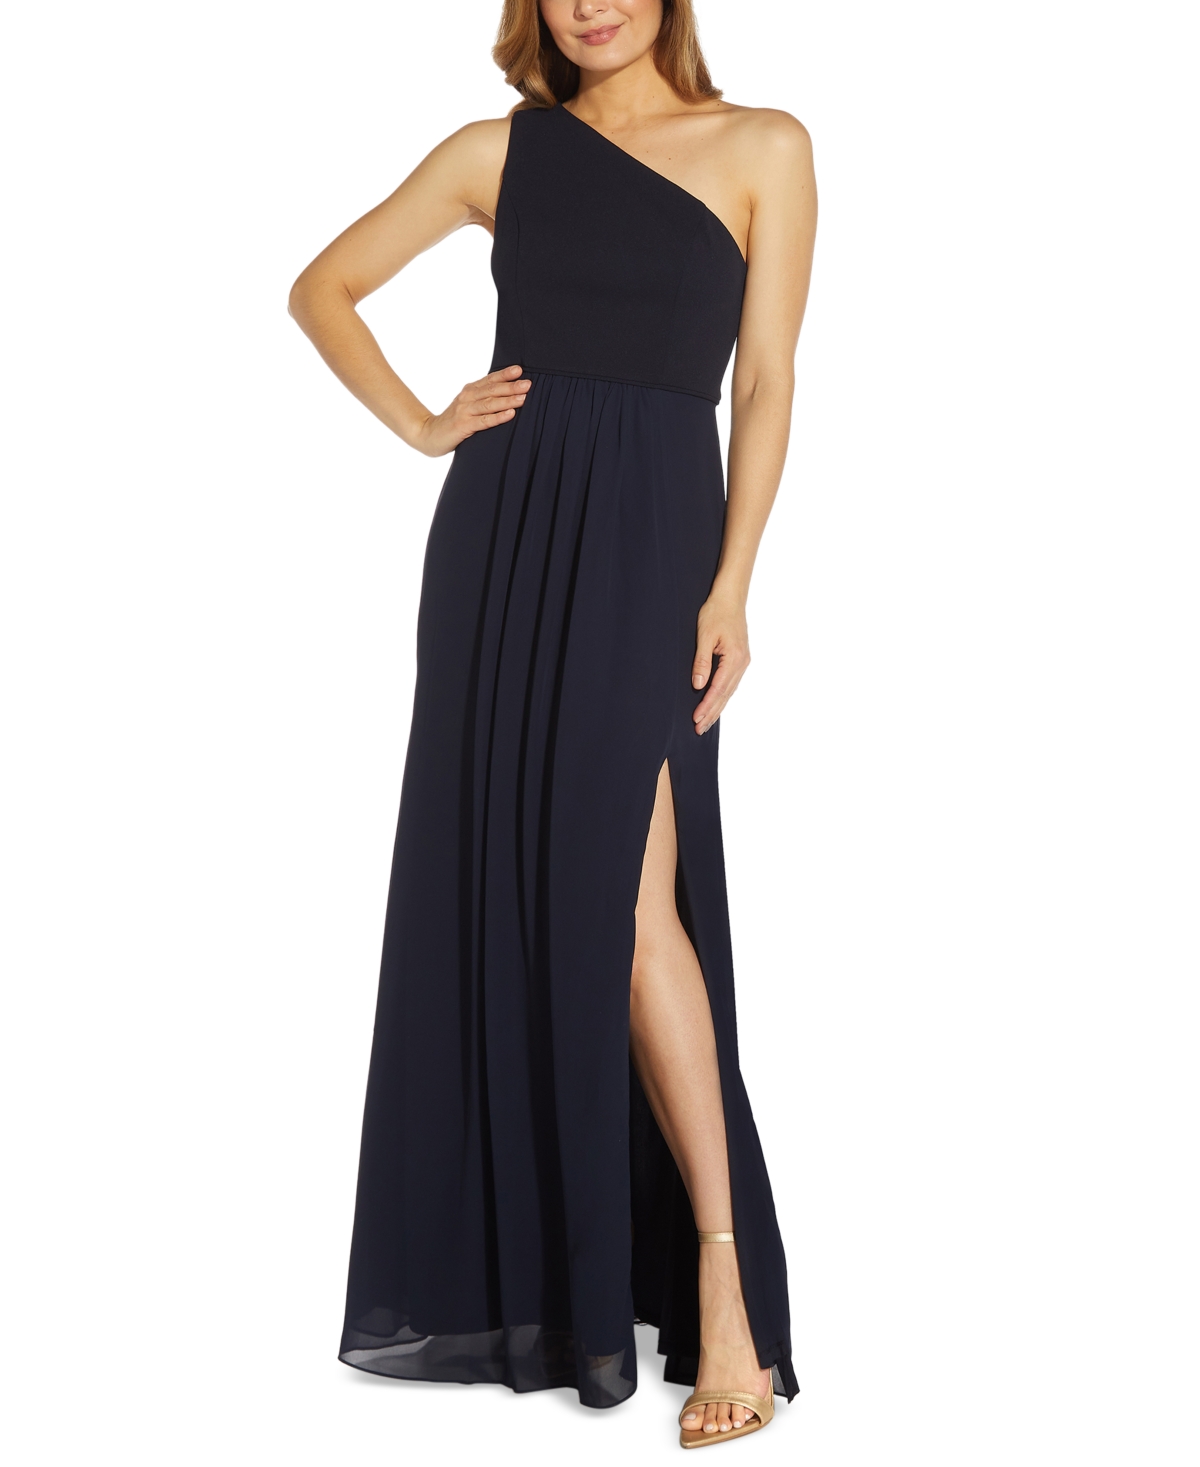 ADRIANNA PAPELL ONE-SHOULDER CHIFFON GOWN